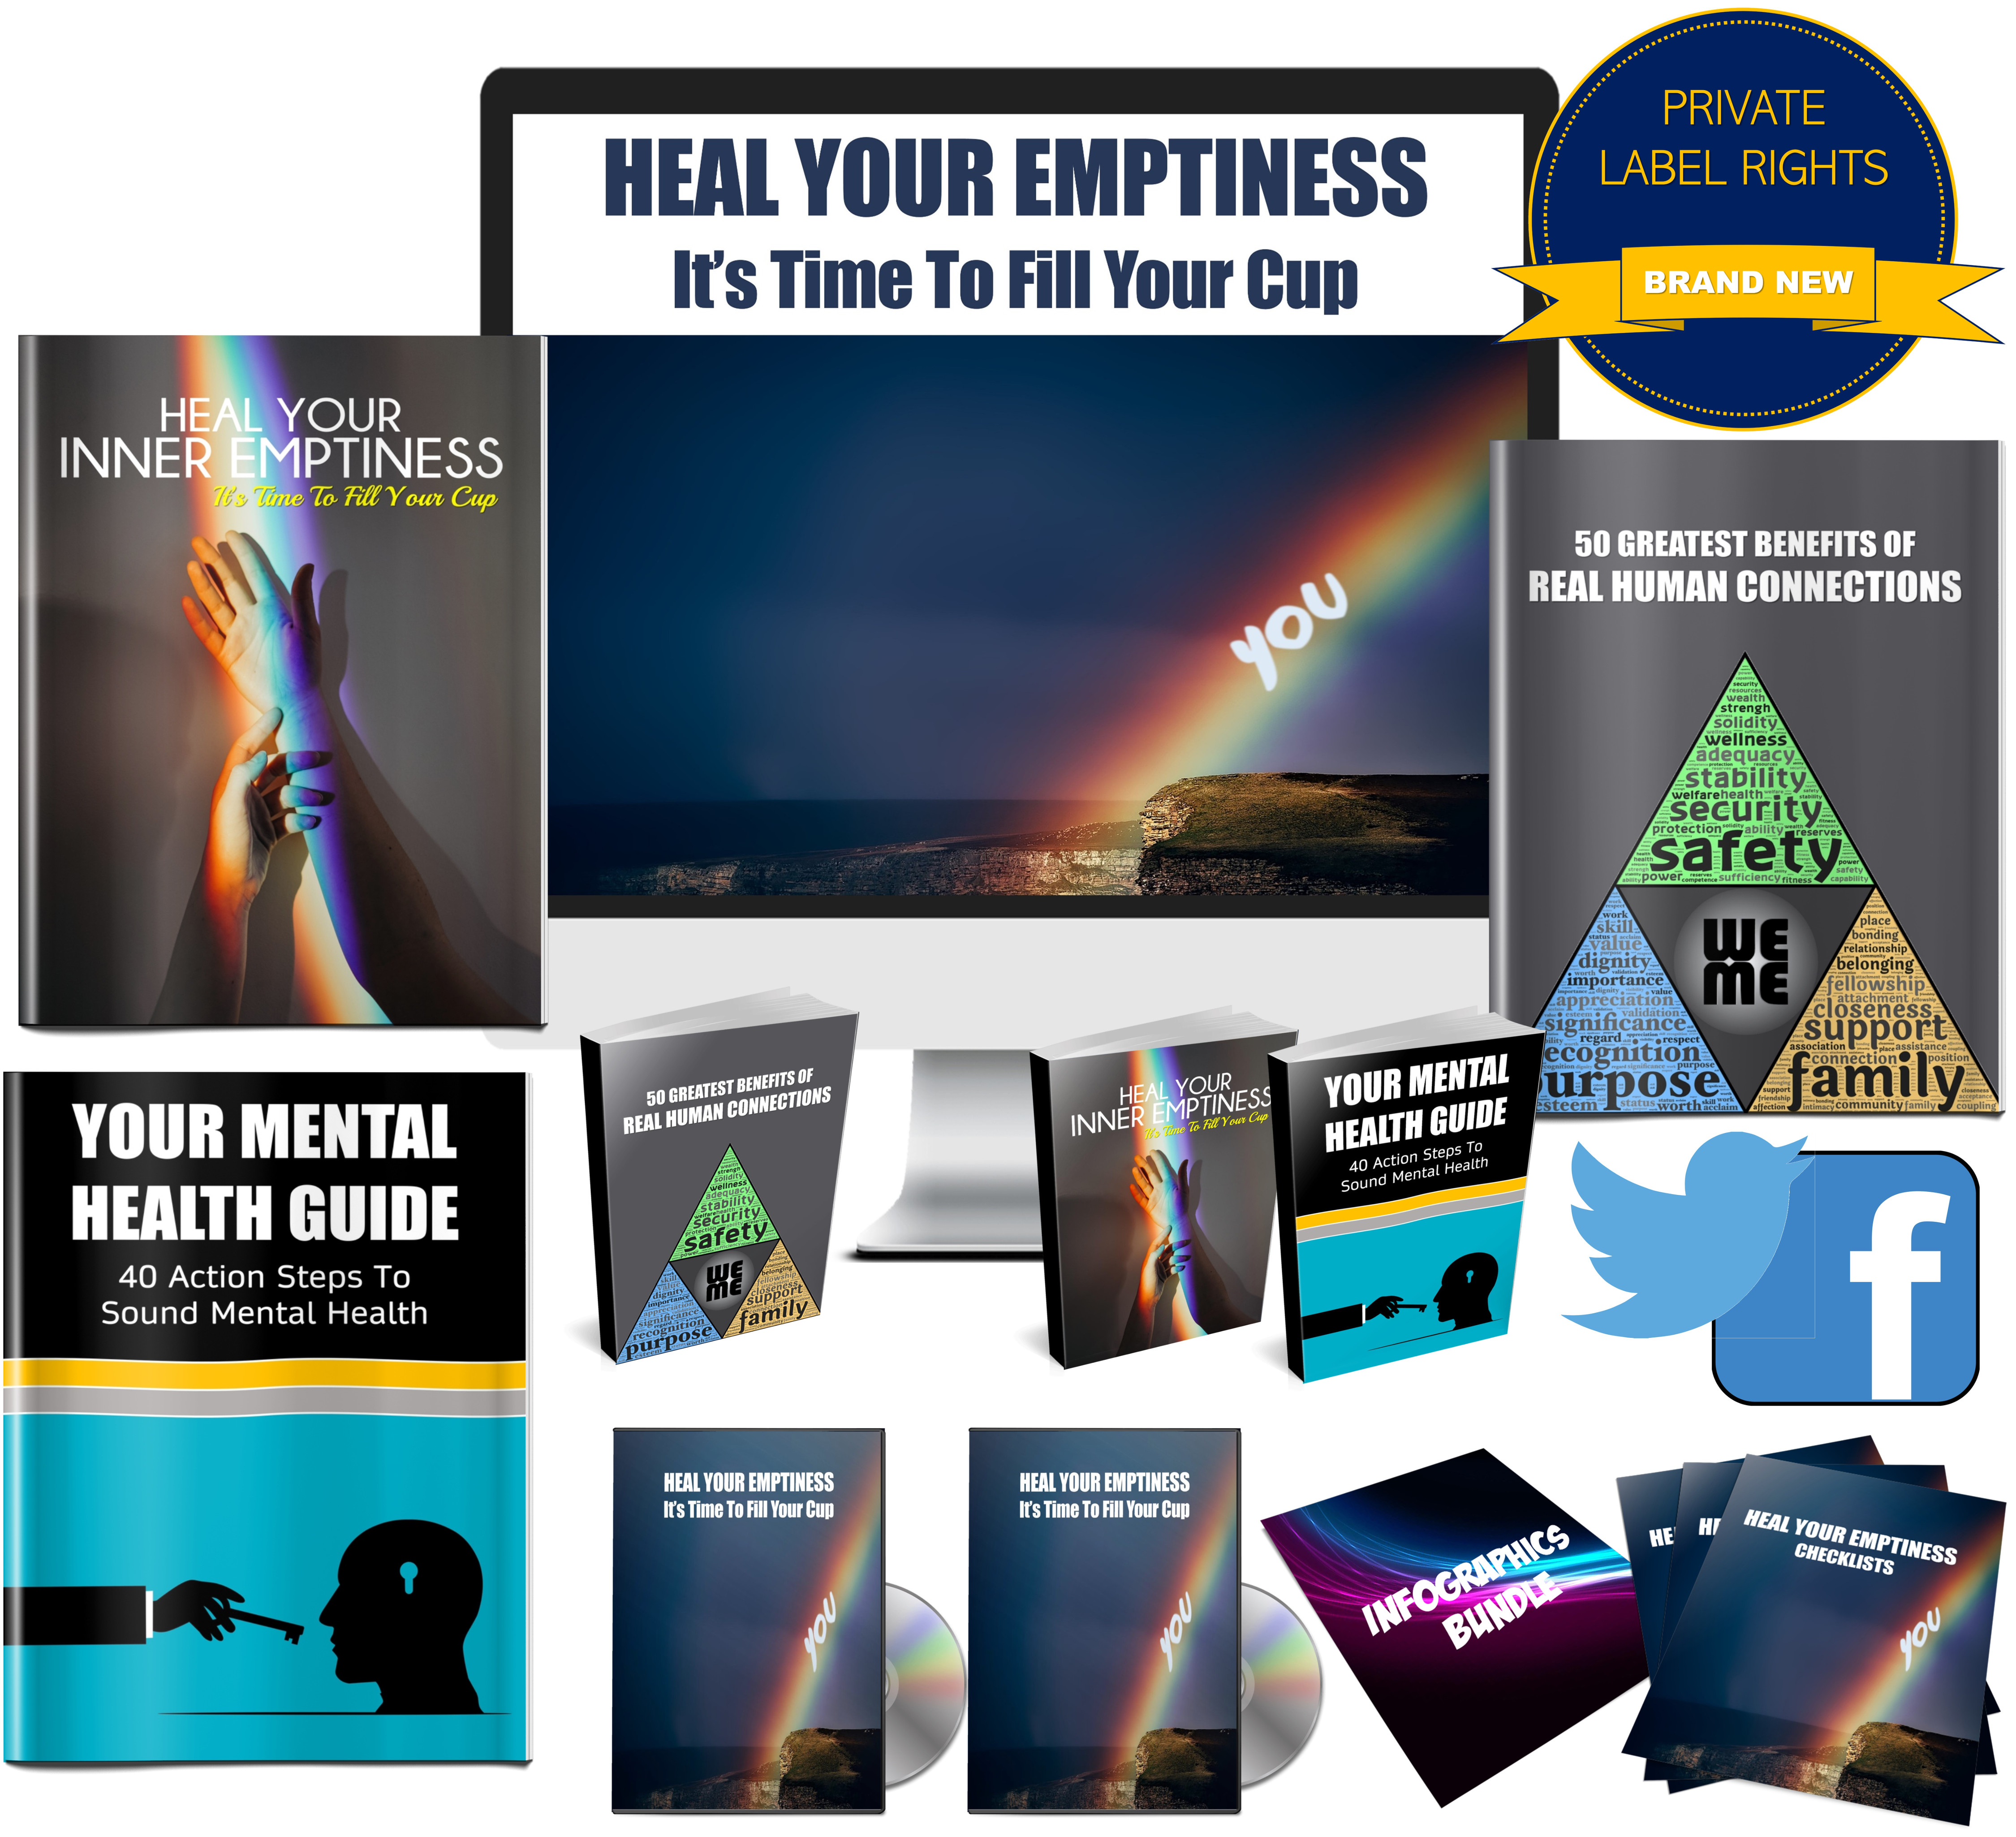 Heal Your Emptiness: It’s Time To Fill Your Cup Giant Content Pack with PLR Rights